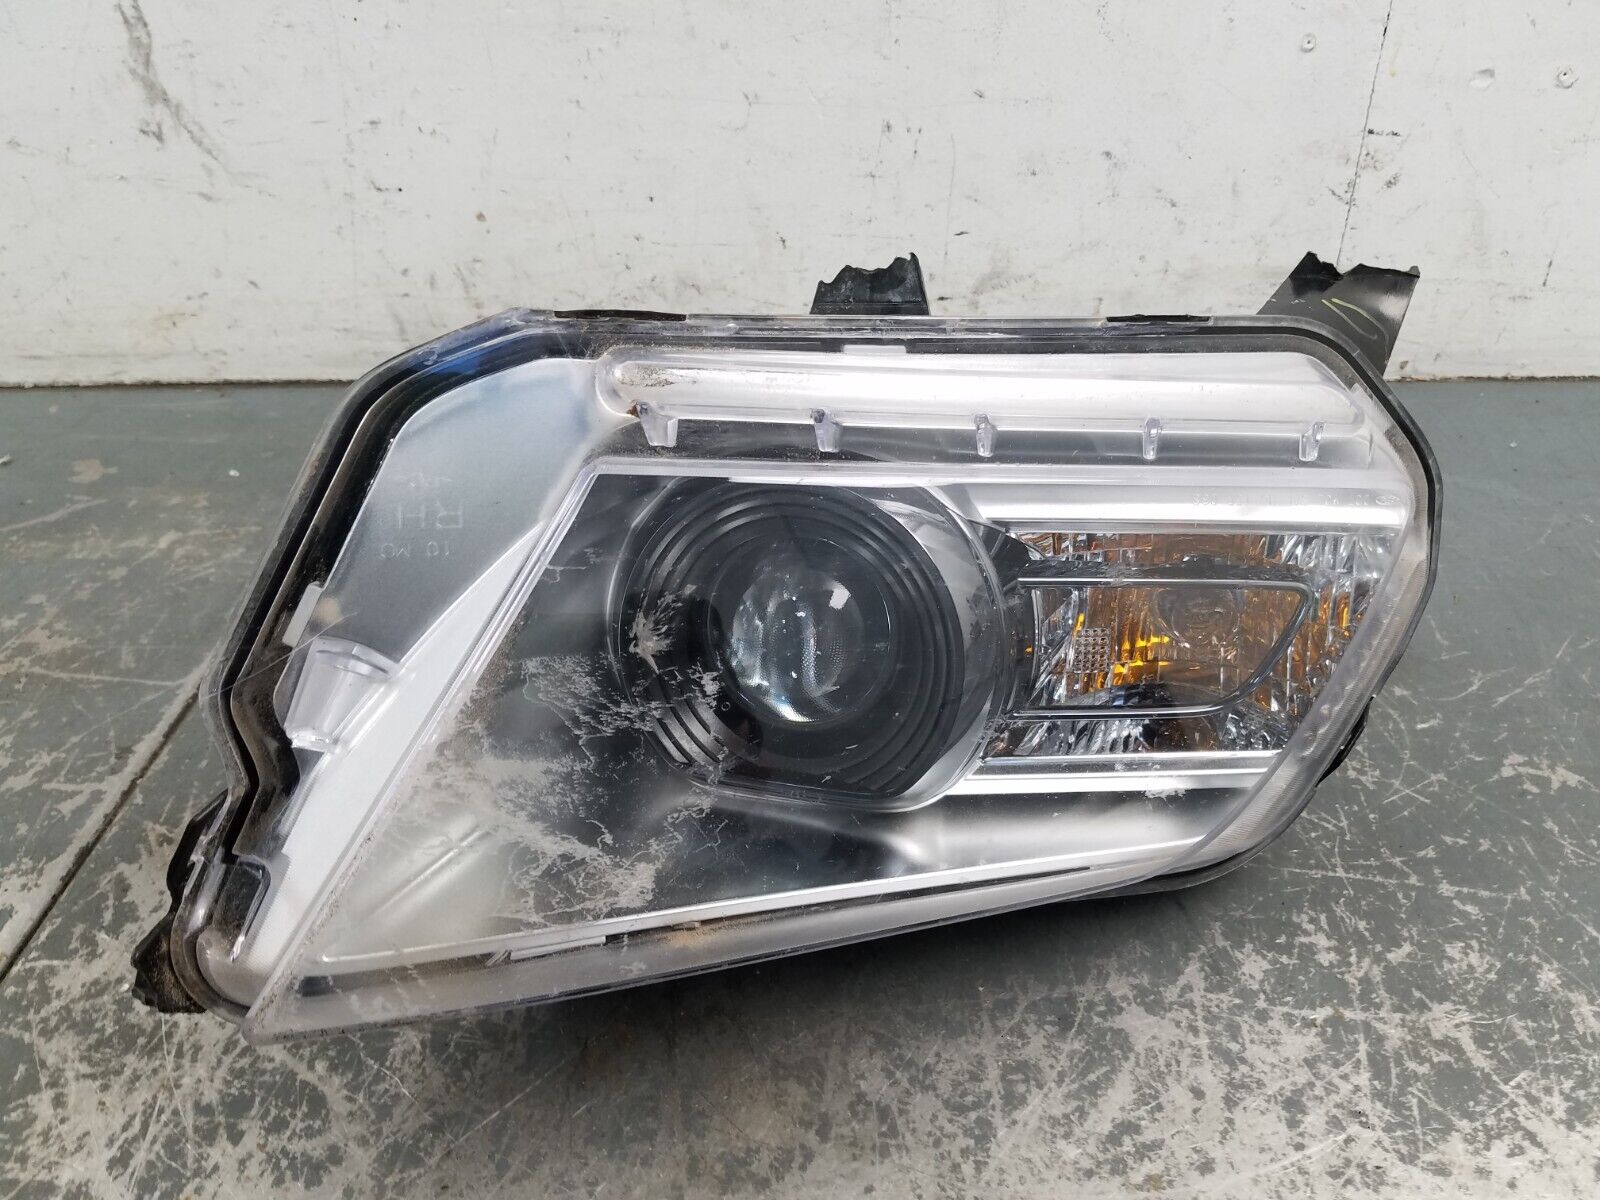 2011 Ford Mustang Shelby GT500 Right Passenger HID Head Light - Damage #0887 Q6